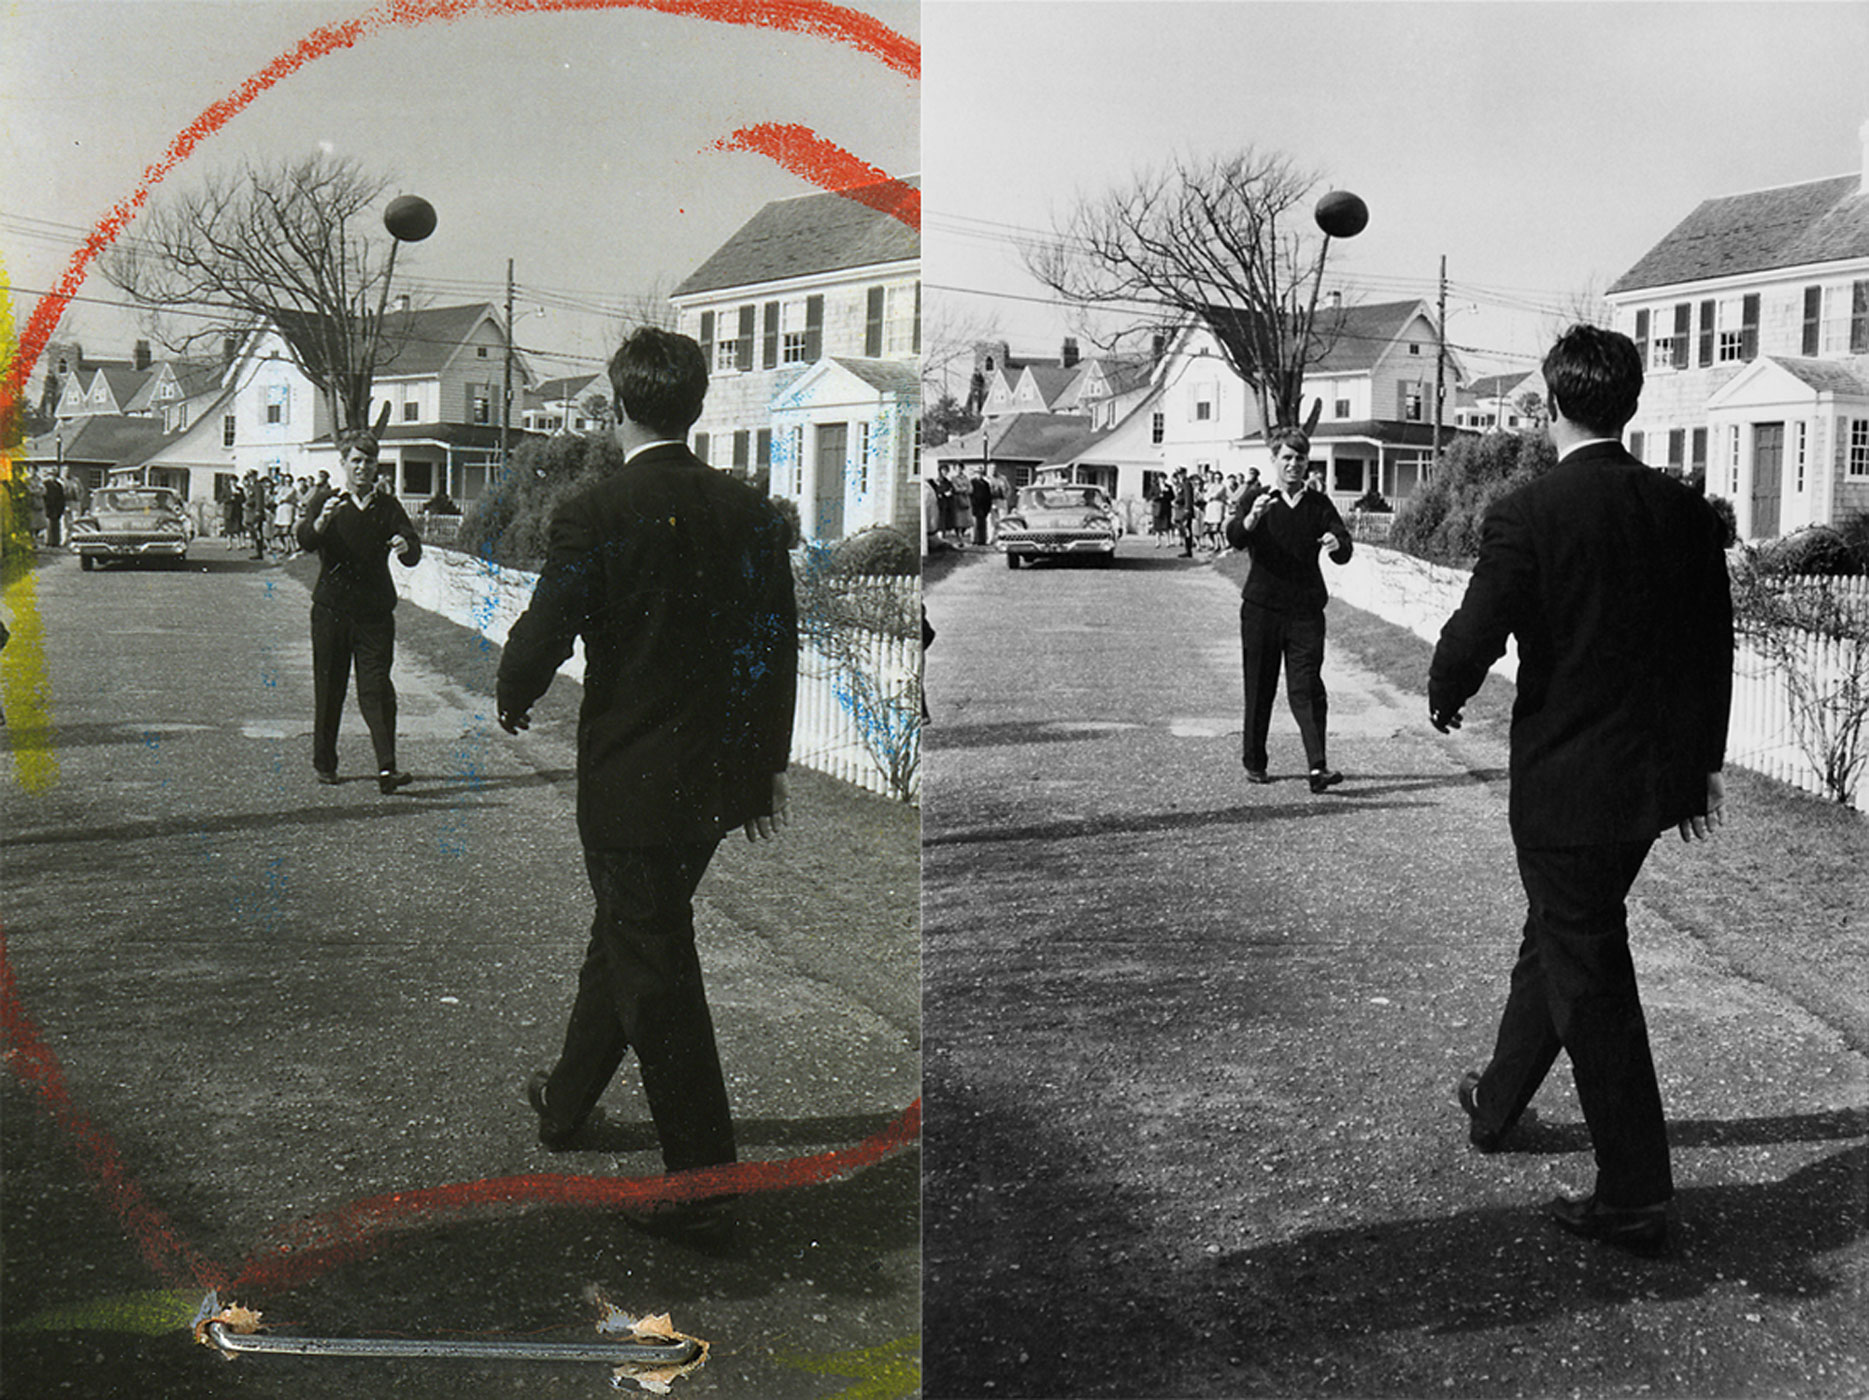 Robert and Edward Kennedy, John F. Kennedy’s brothers, toss a football in Hyannis Port, Mass., the morning after the 1960 election. The Newseum restoration, right, removed the staple and red marks.